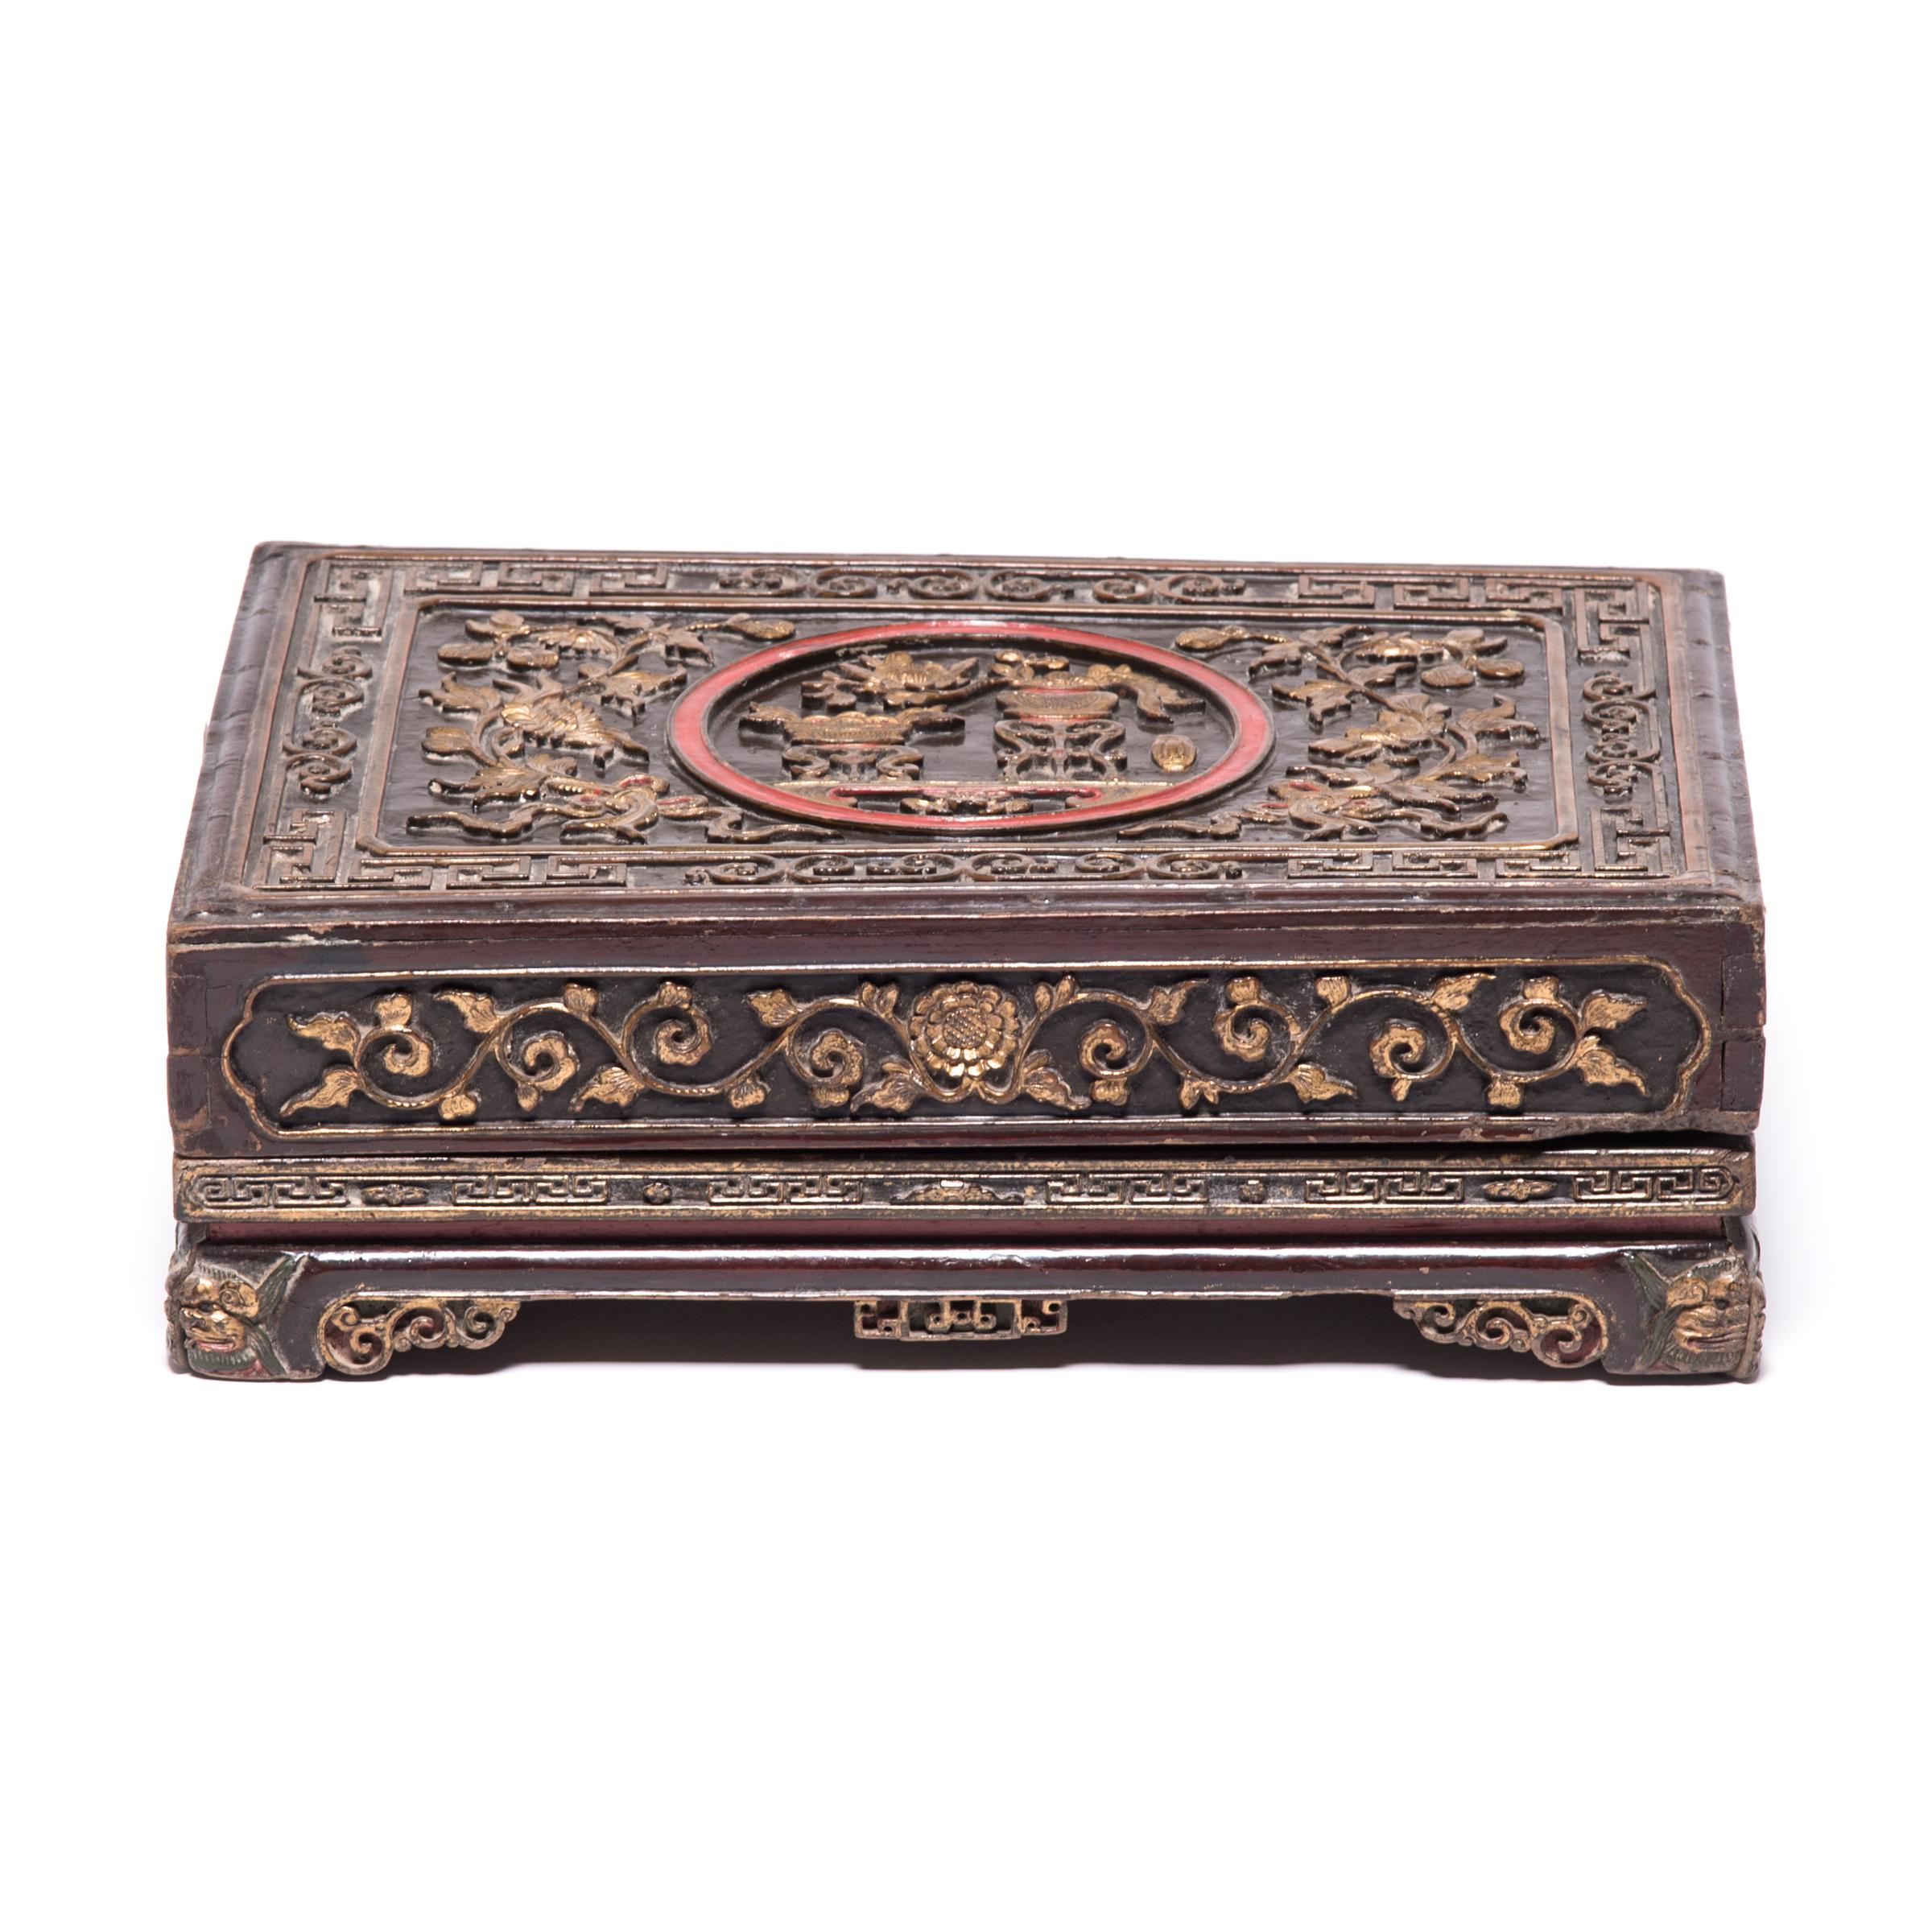 This ornately carved 19th-century offering box would have been presented as a gift filled with popular Chinese snacks, including roasted melon seeds, dried fruit, and soybeans toasted with cinnamon, fennel, and other spices. Offering fruits, floral